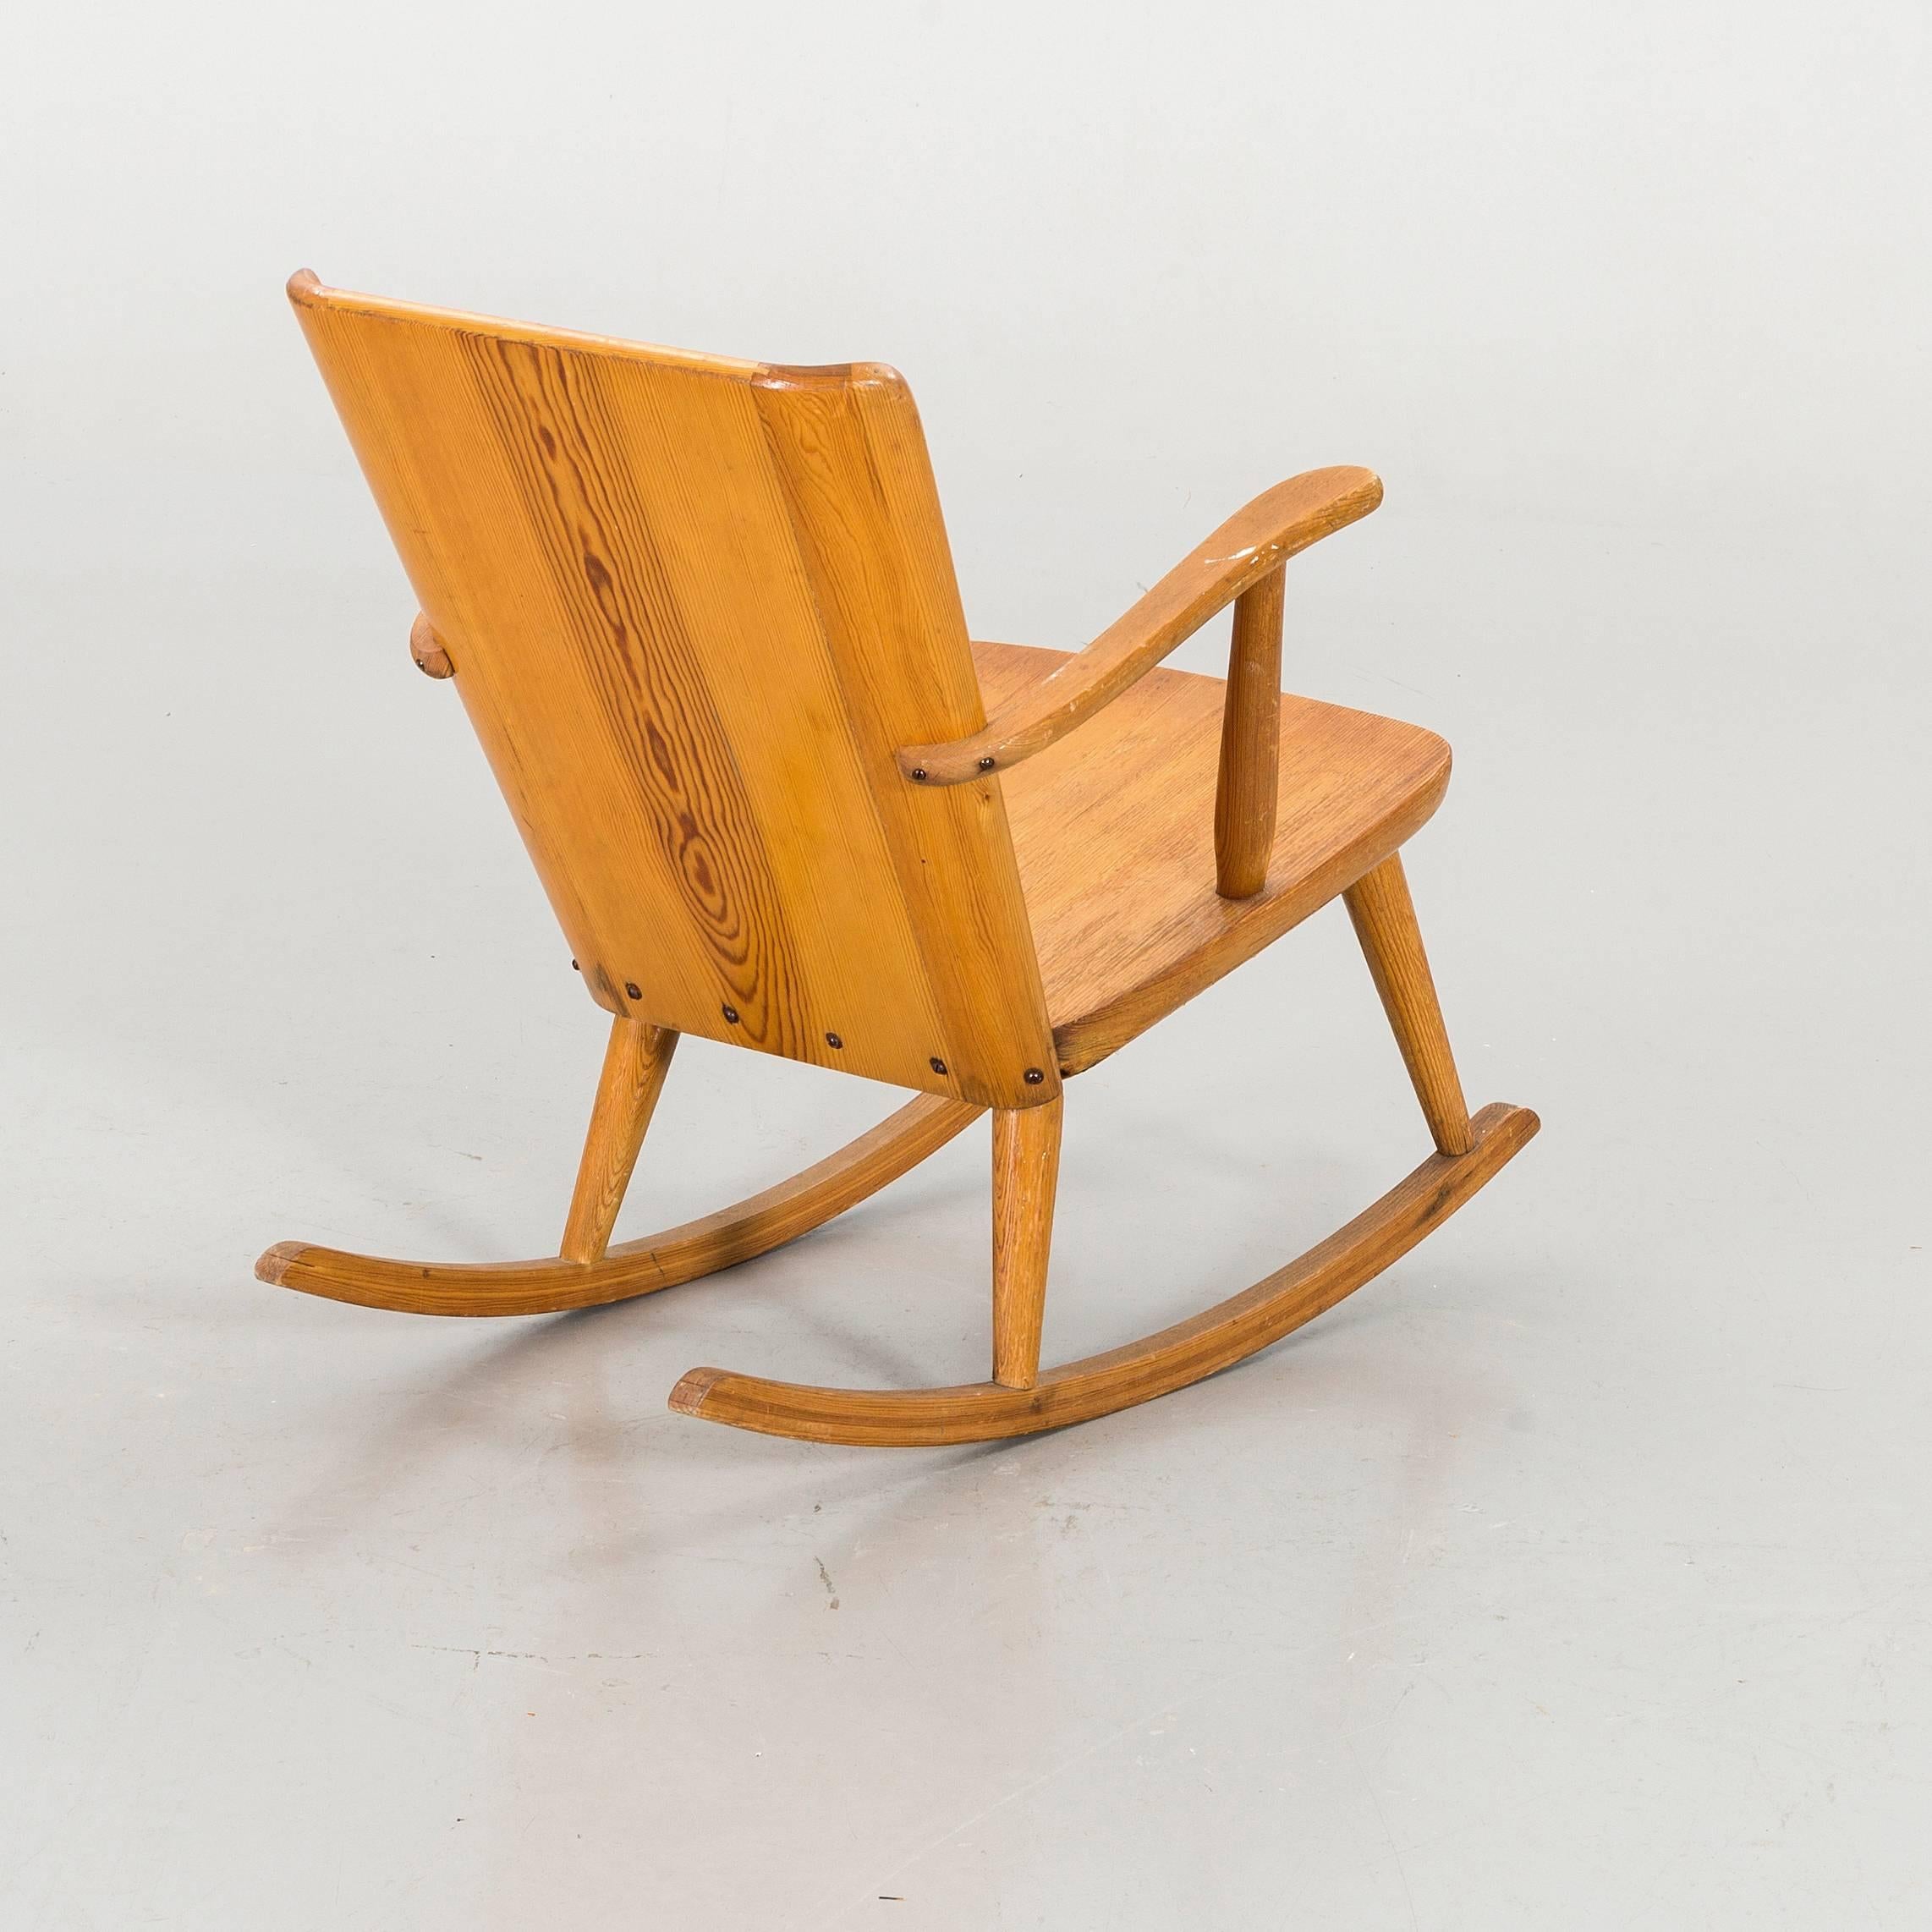 G¨ran Malmvall rocking armchair in natural pinewood, manufactured by Karl Andersson & Söner in Sweden, 1945. Signed in the bottom.